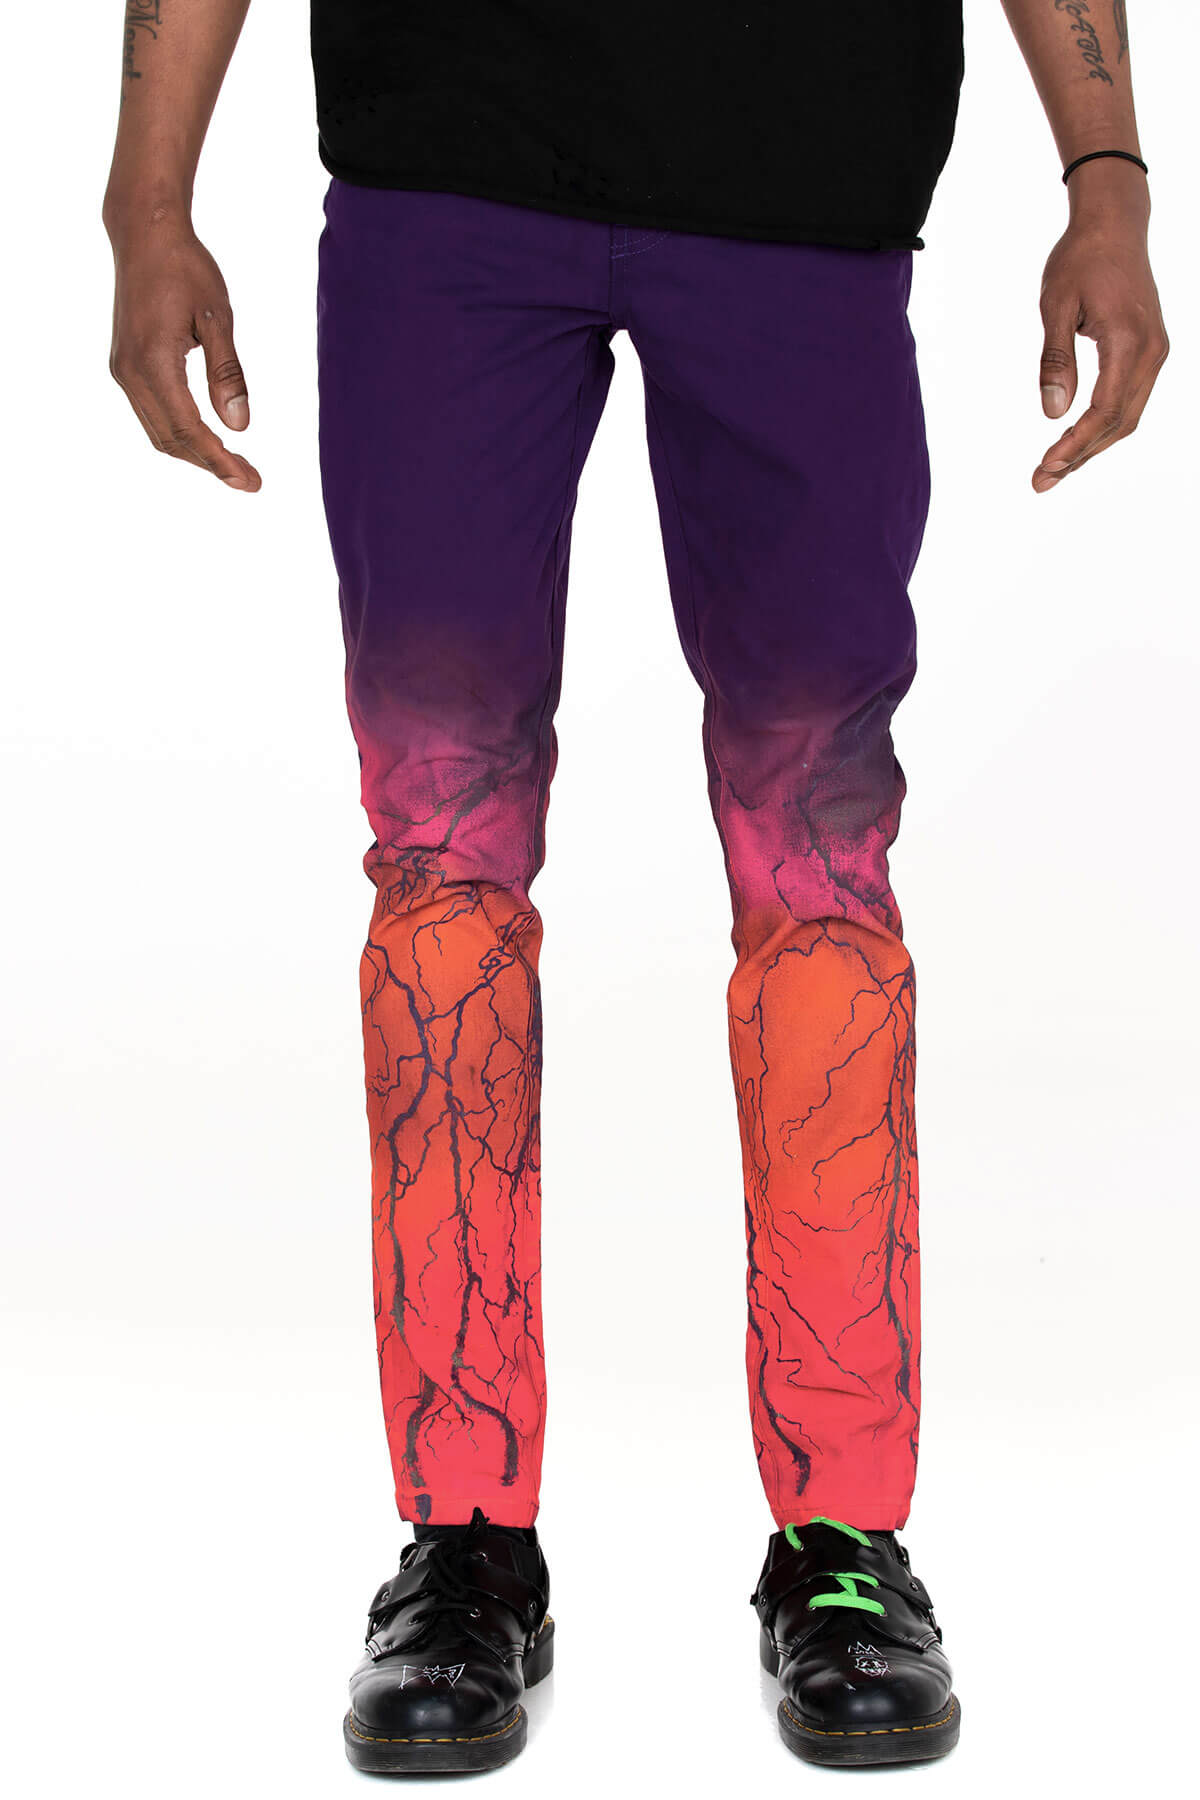 LIGHTNING OMBRE HAND SPRAYED AND CRAFTED CRIXUS JEAN - MJB